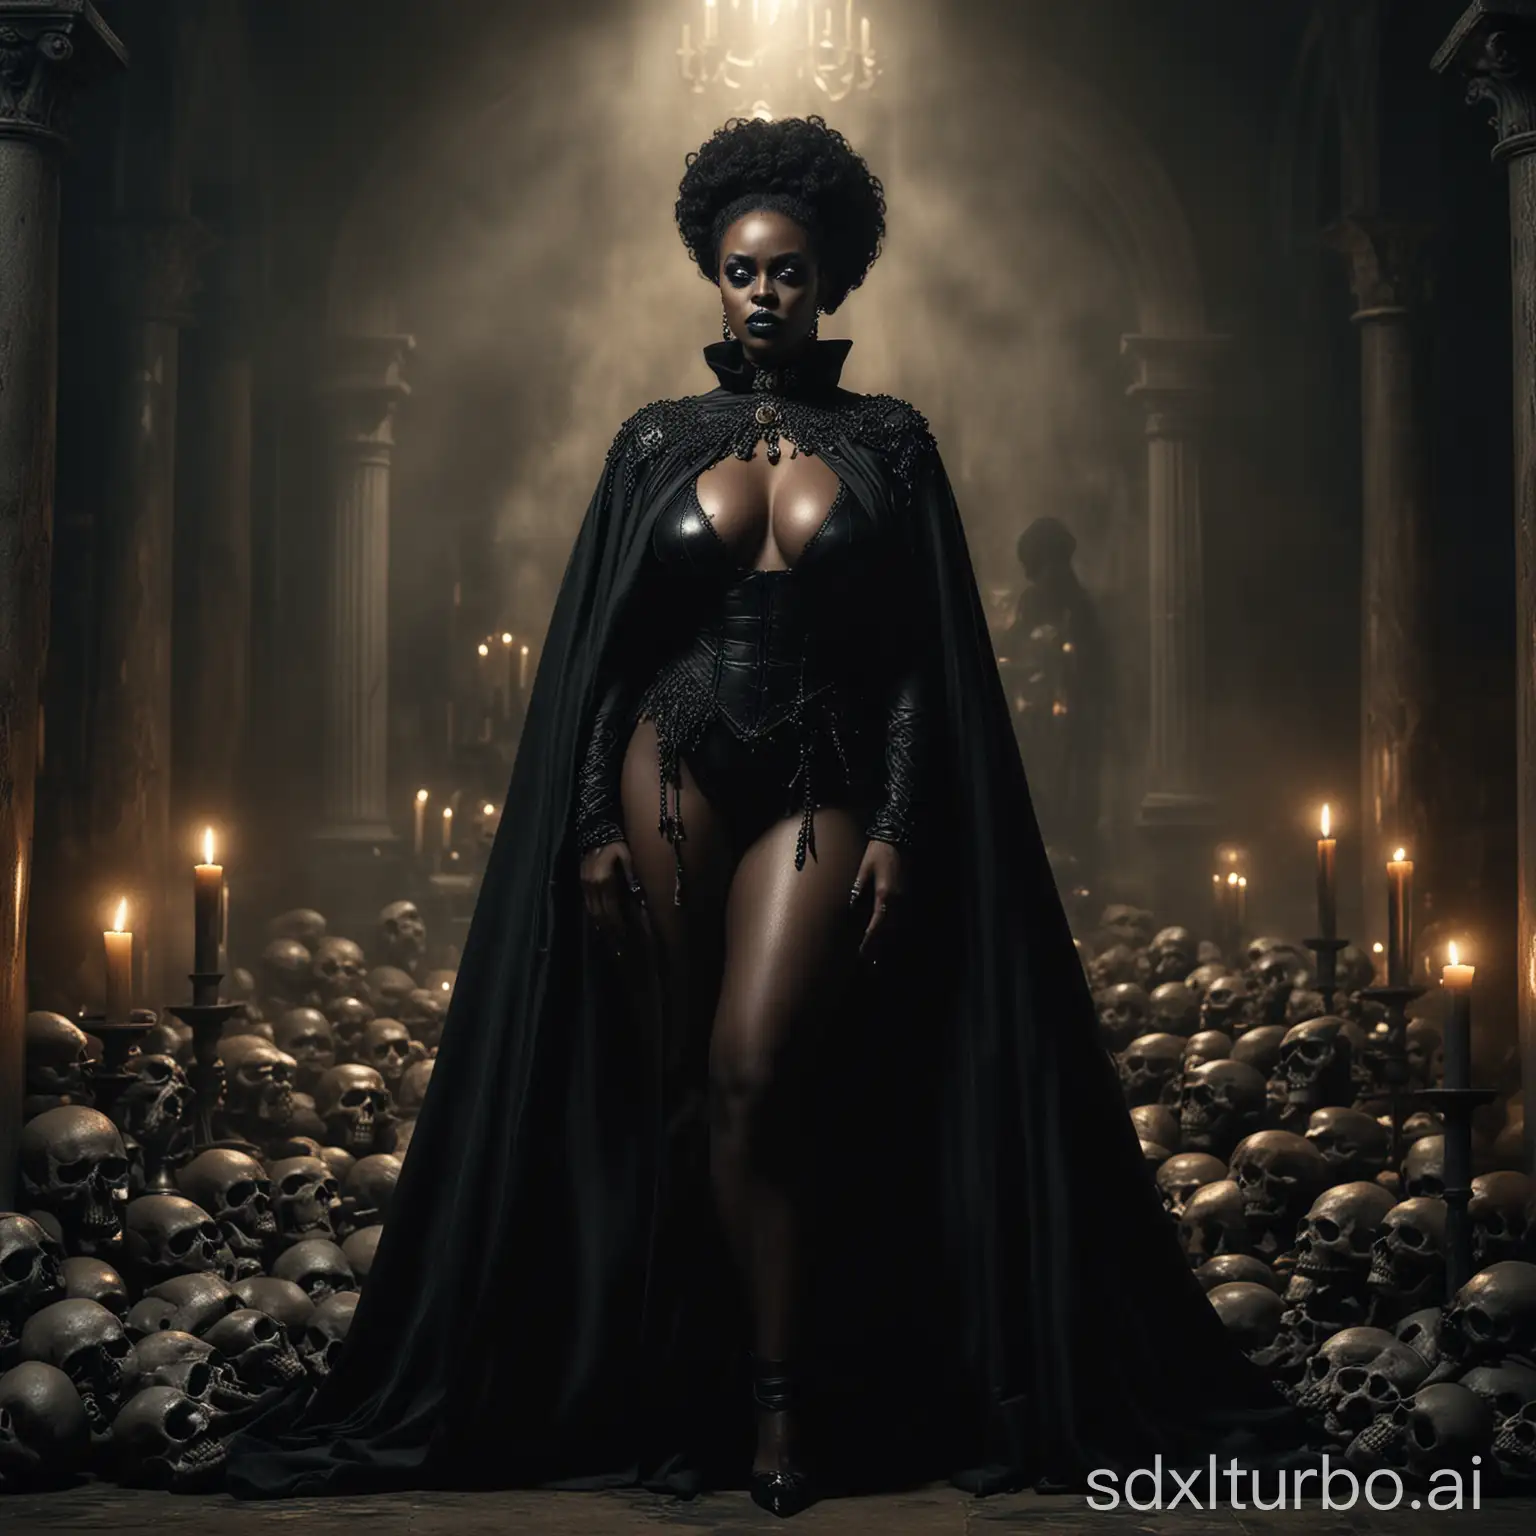 Majestic-Black-Woman-with-Commanding-Presence-and-Mystique